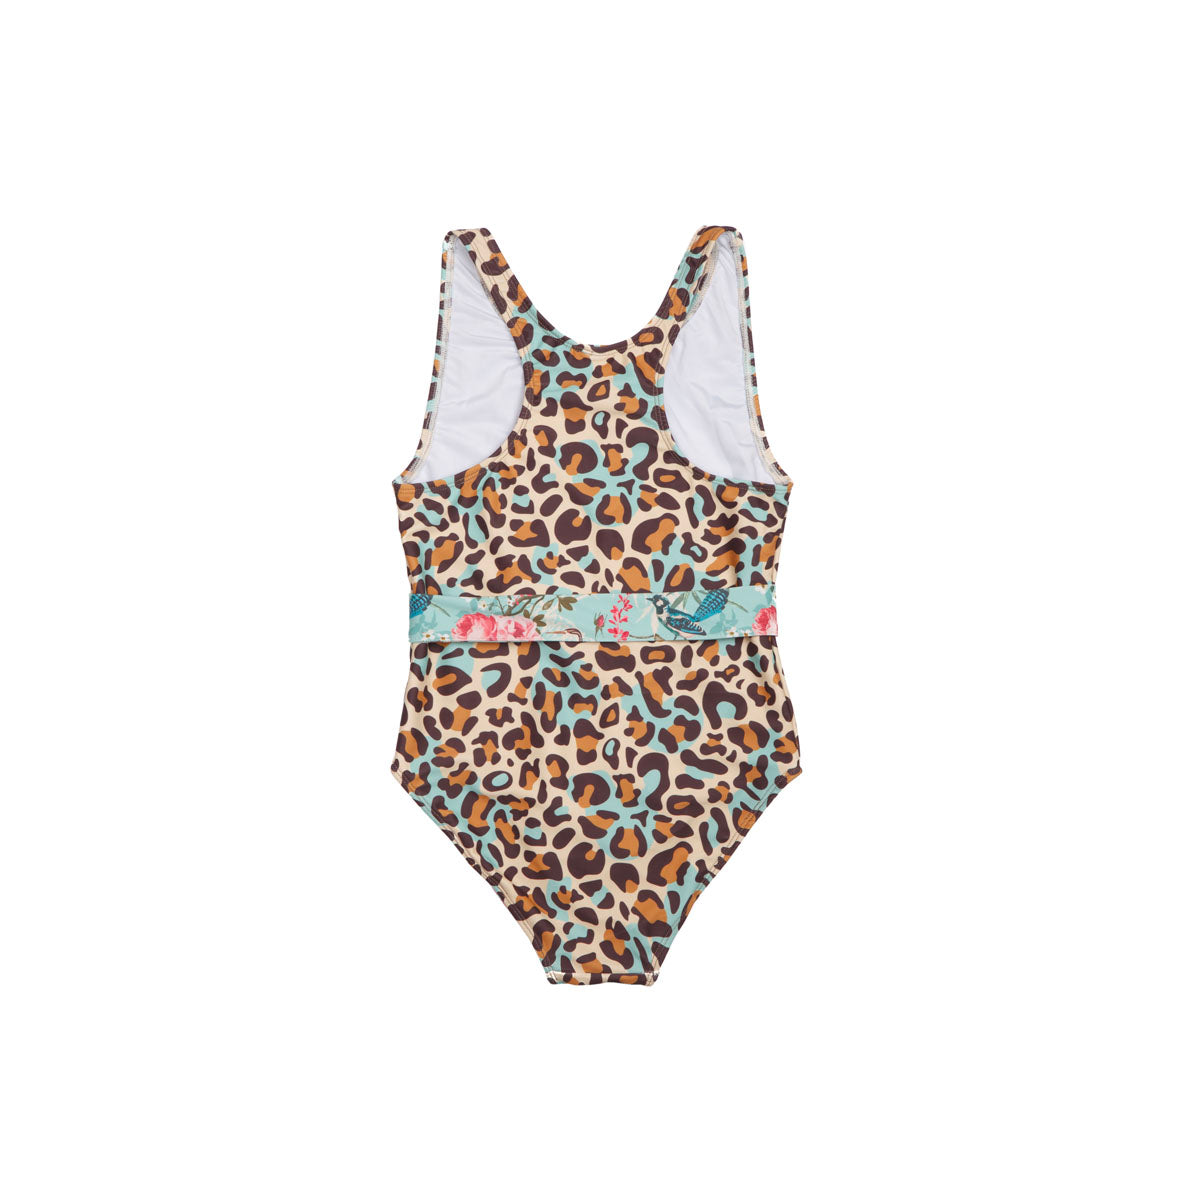 Girls Leopard One Piece Swimsuit with Tie - Back